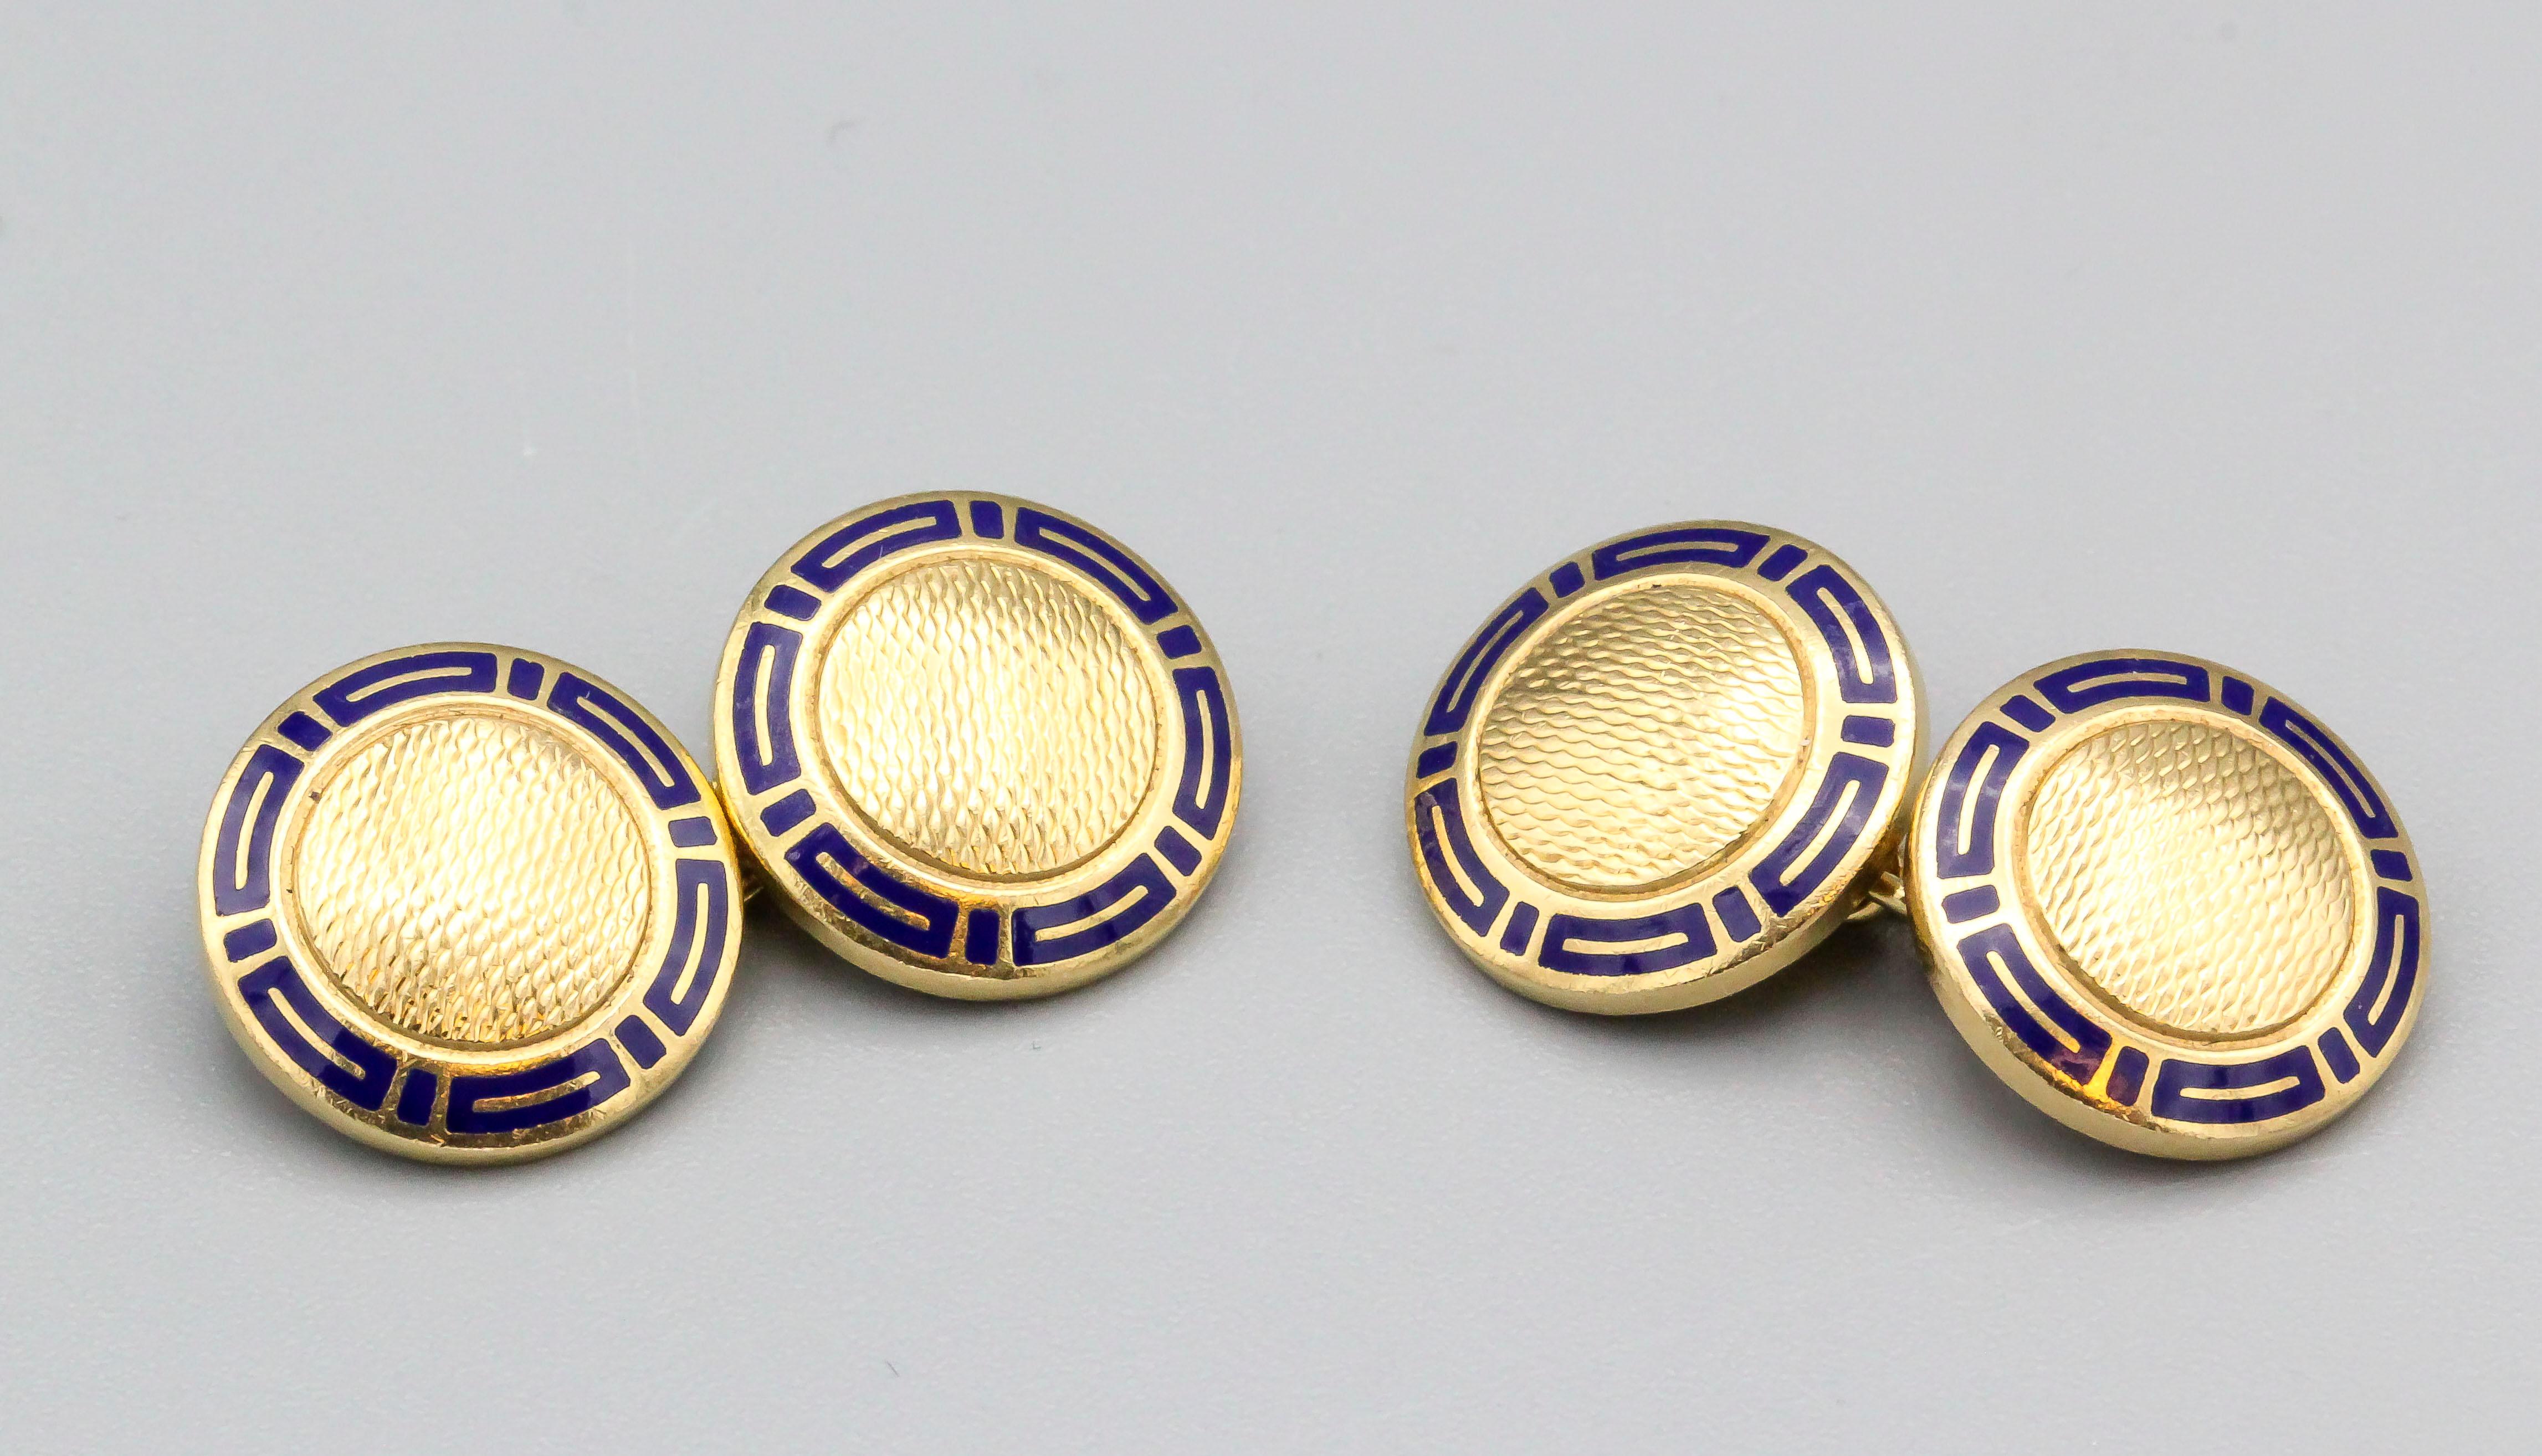 Handsome 18K yellow gold and blue enamel cufflink set by Bulgari. They feature an engine turned design, with blue enamel accents around the edges.  

Hallmarks: Bulgari, 750, Italian standard marks.